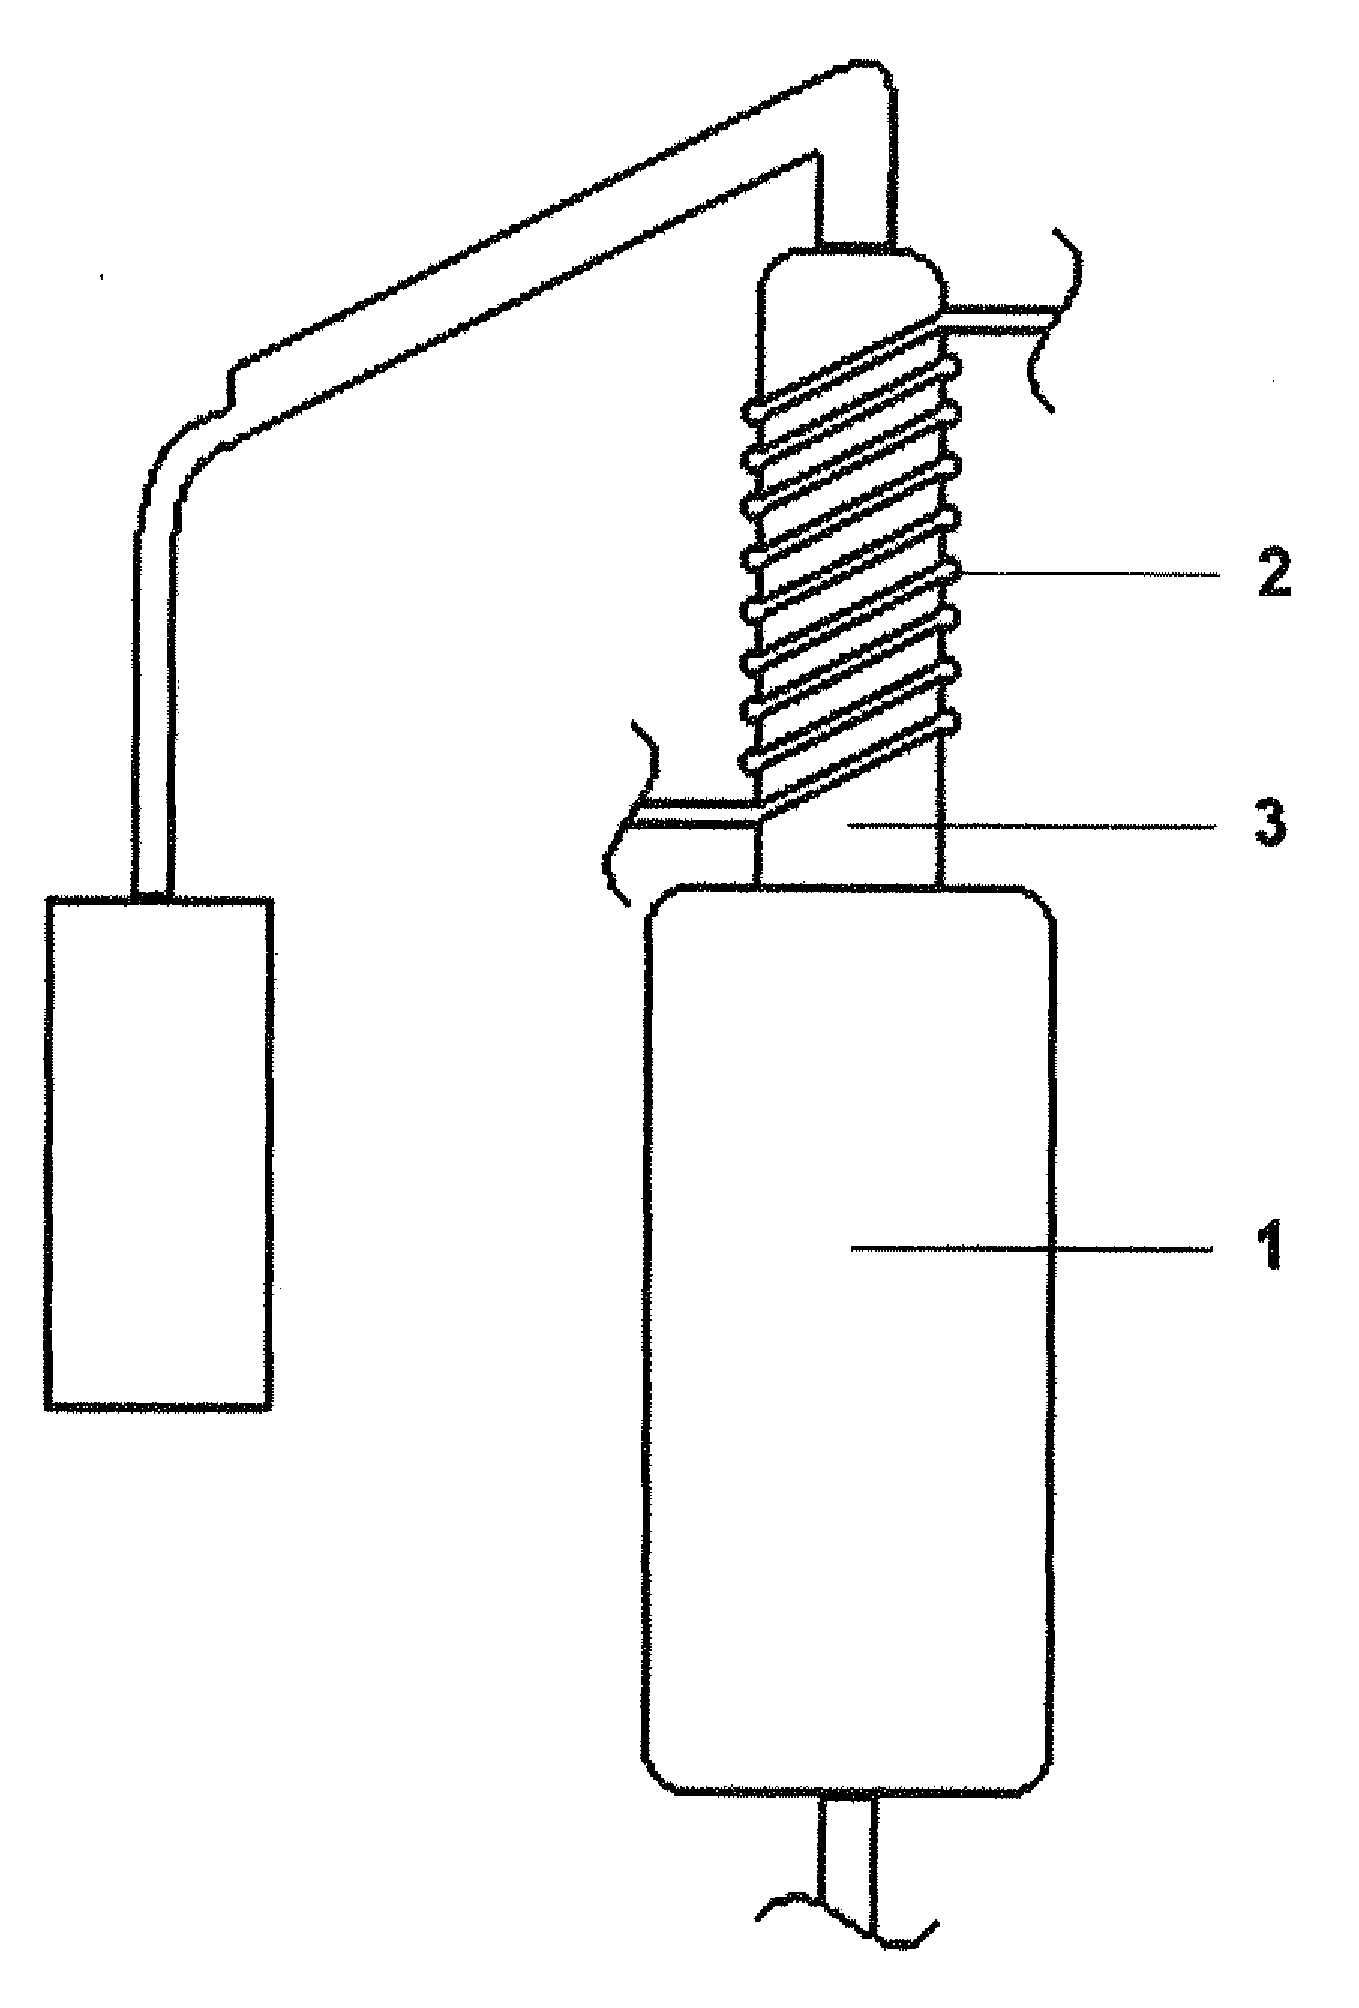 Process for the distillation of decanted oils for the production of petroleum pitches